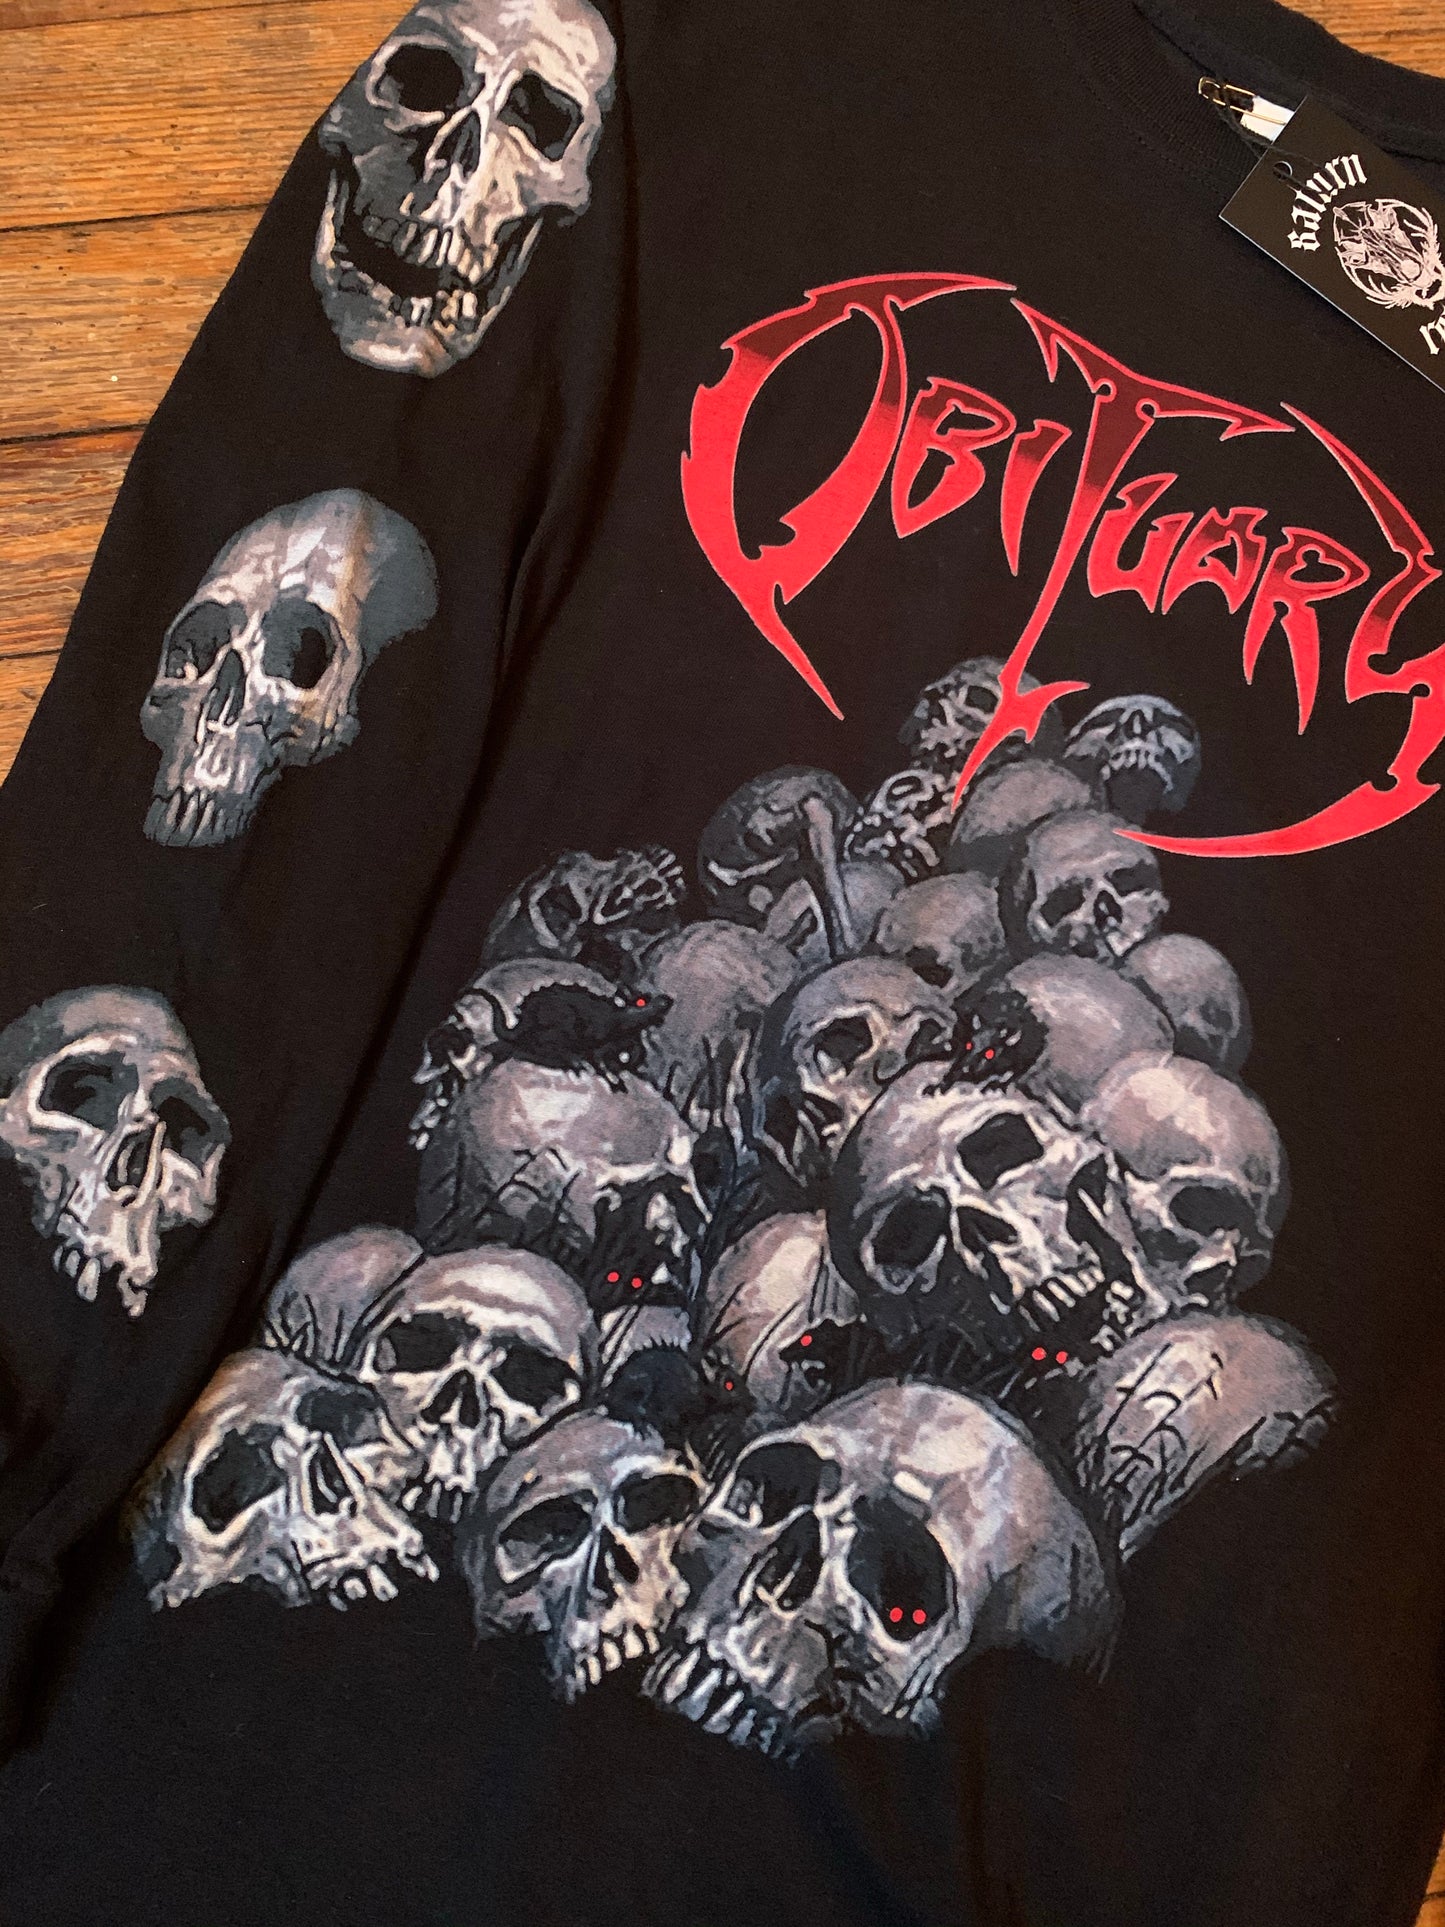 Pre-Owned Obituary Pile of Skulls Chopped In Half Long Sleeve T-Shirt